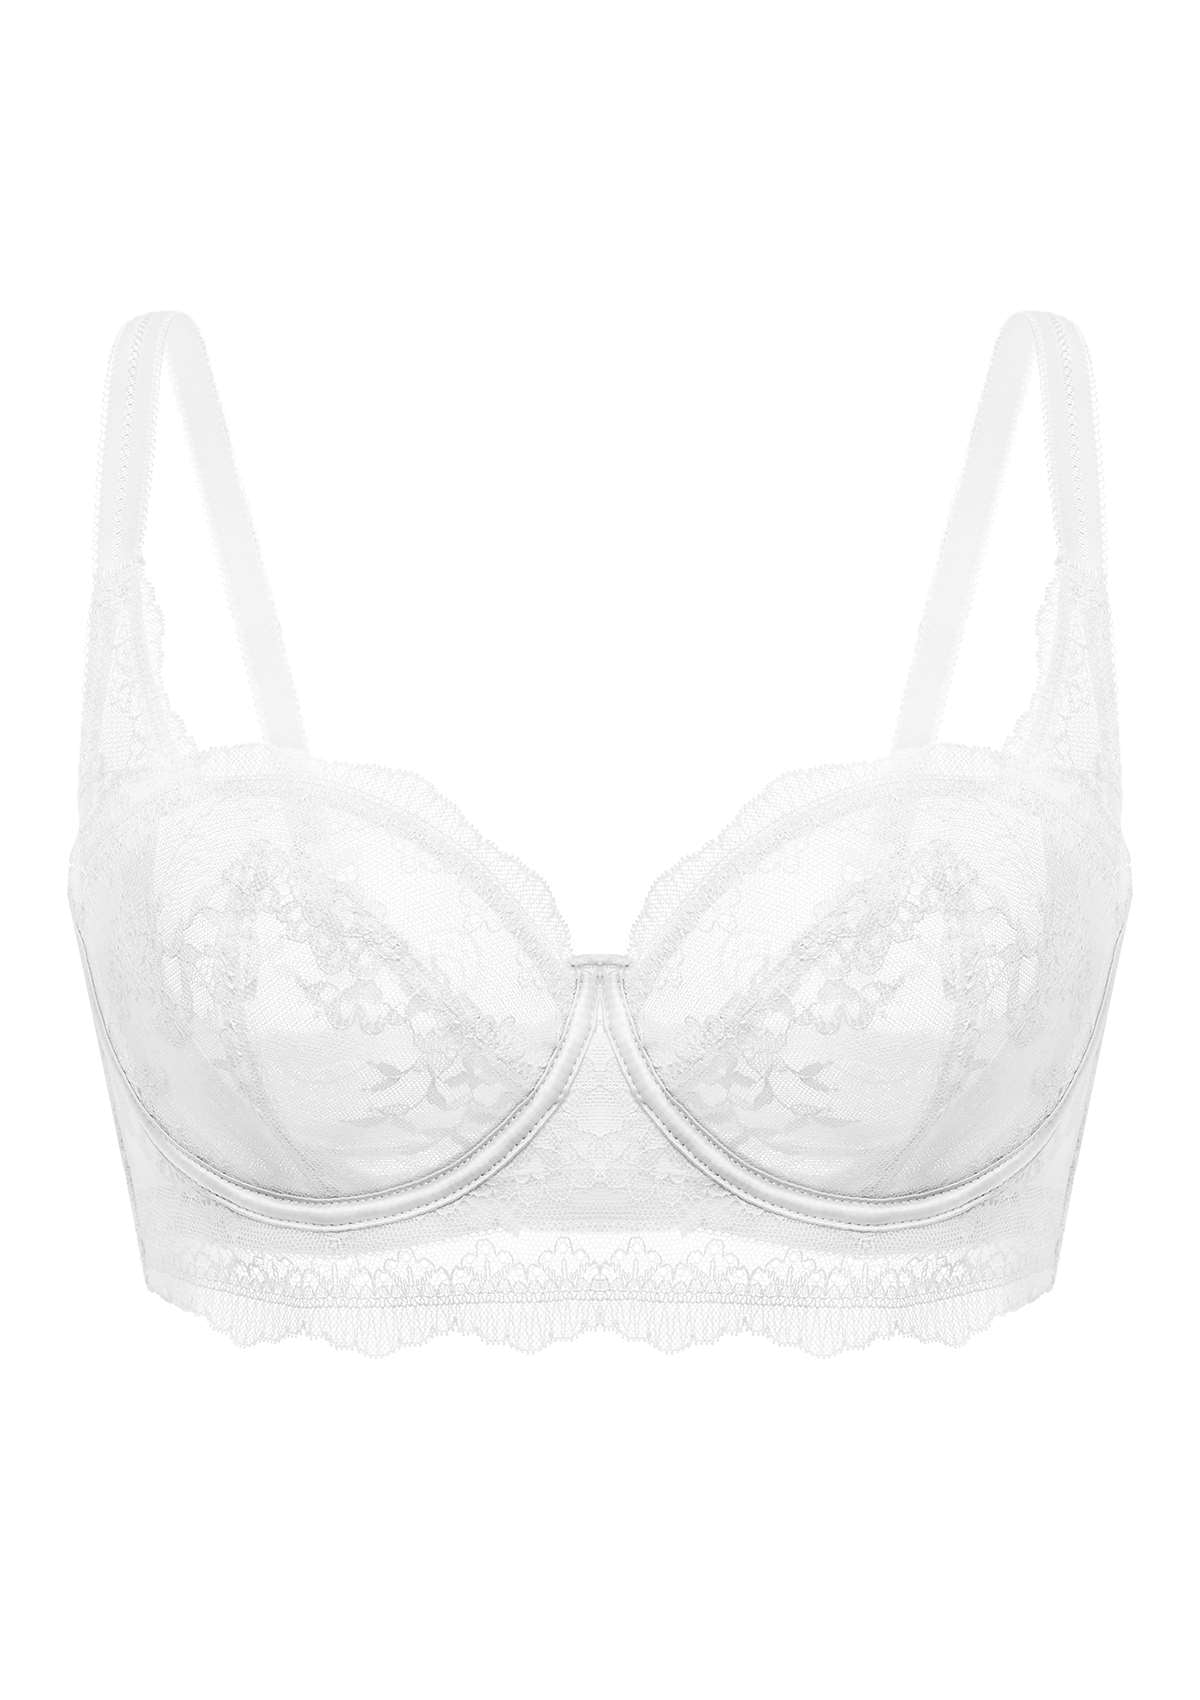 HSIA I Do Floral Lace Bridal Balconette Beautiful Bra For Special Day - White / 38 / DDD/F